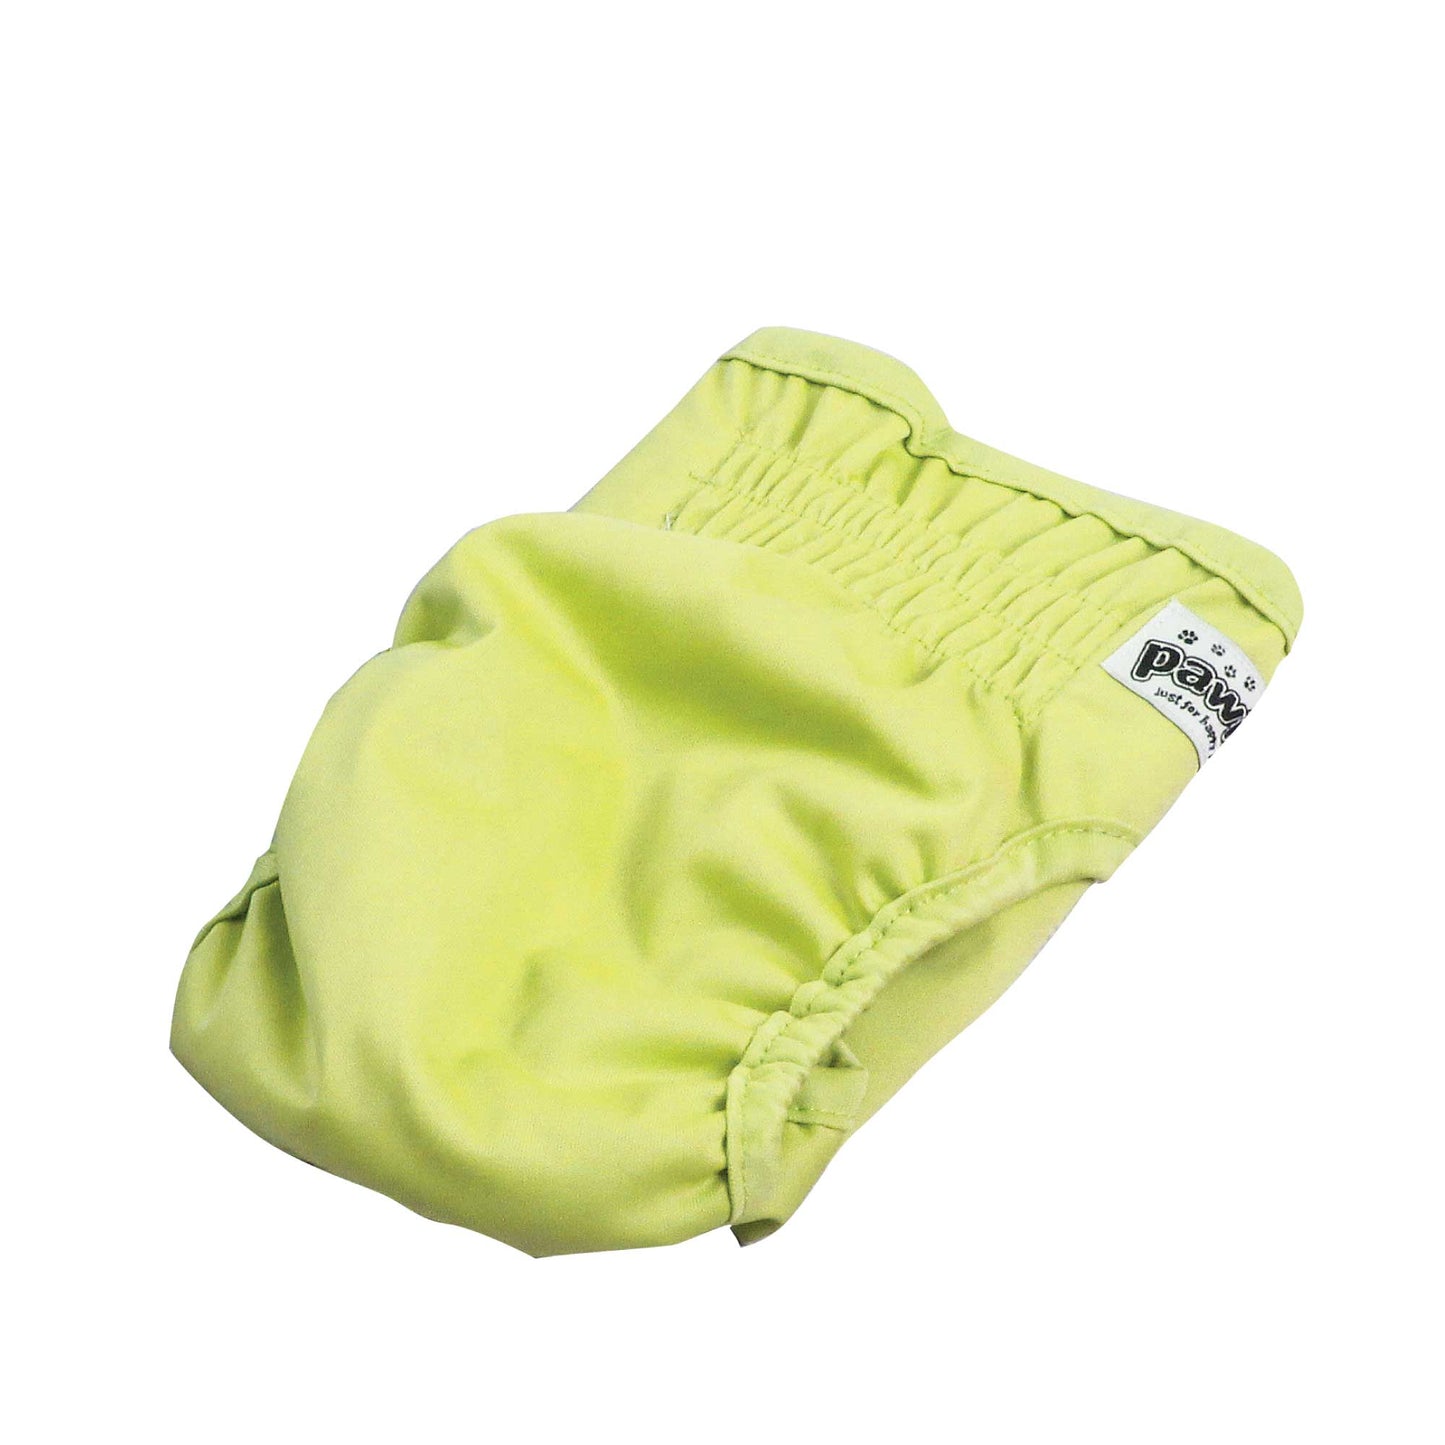 3 Pack Reusable Eco Washable  Female Dog Diapers